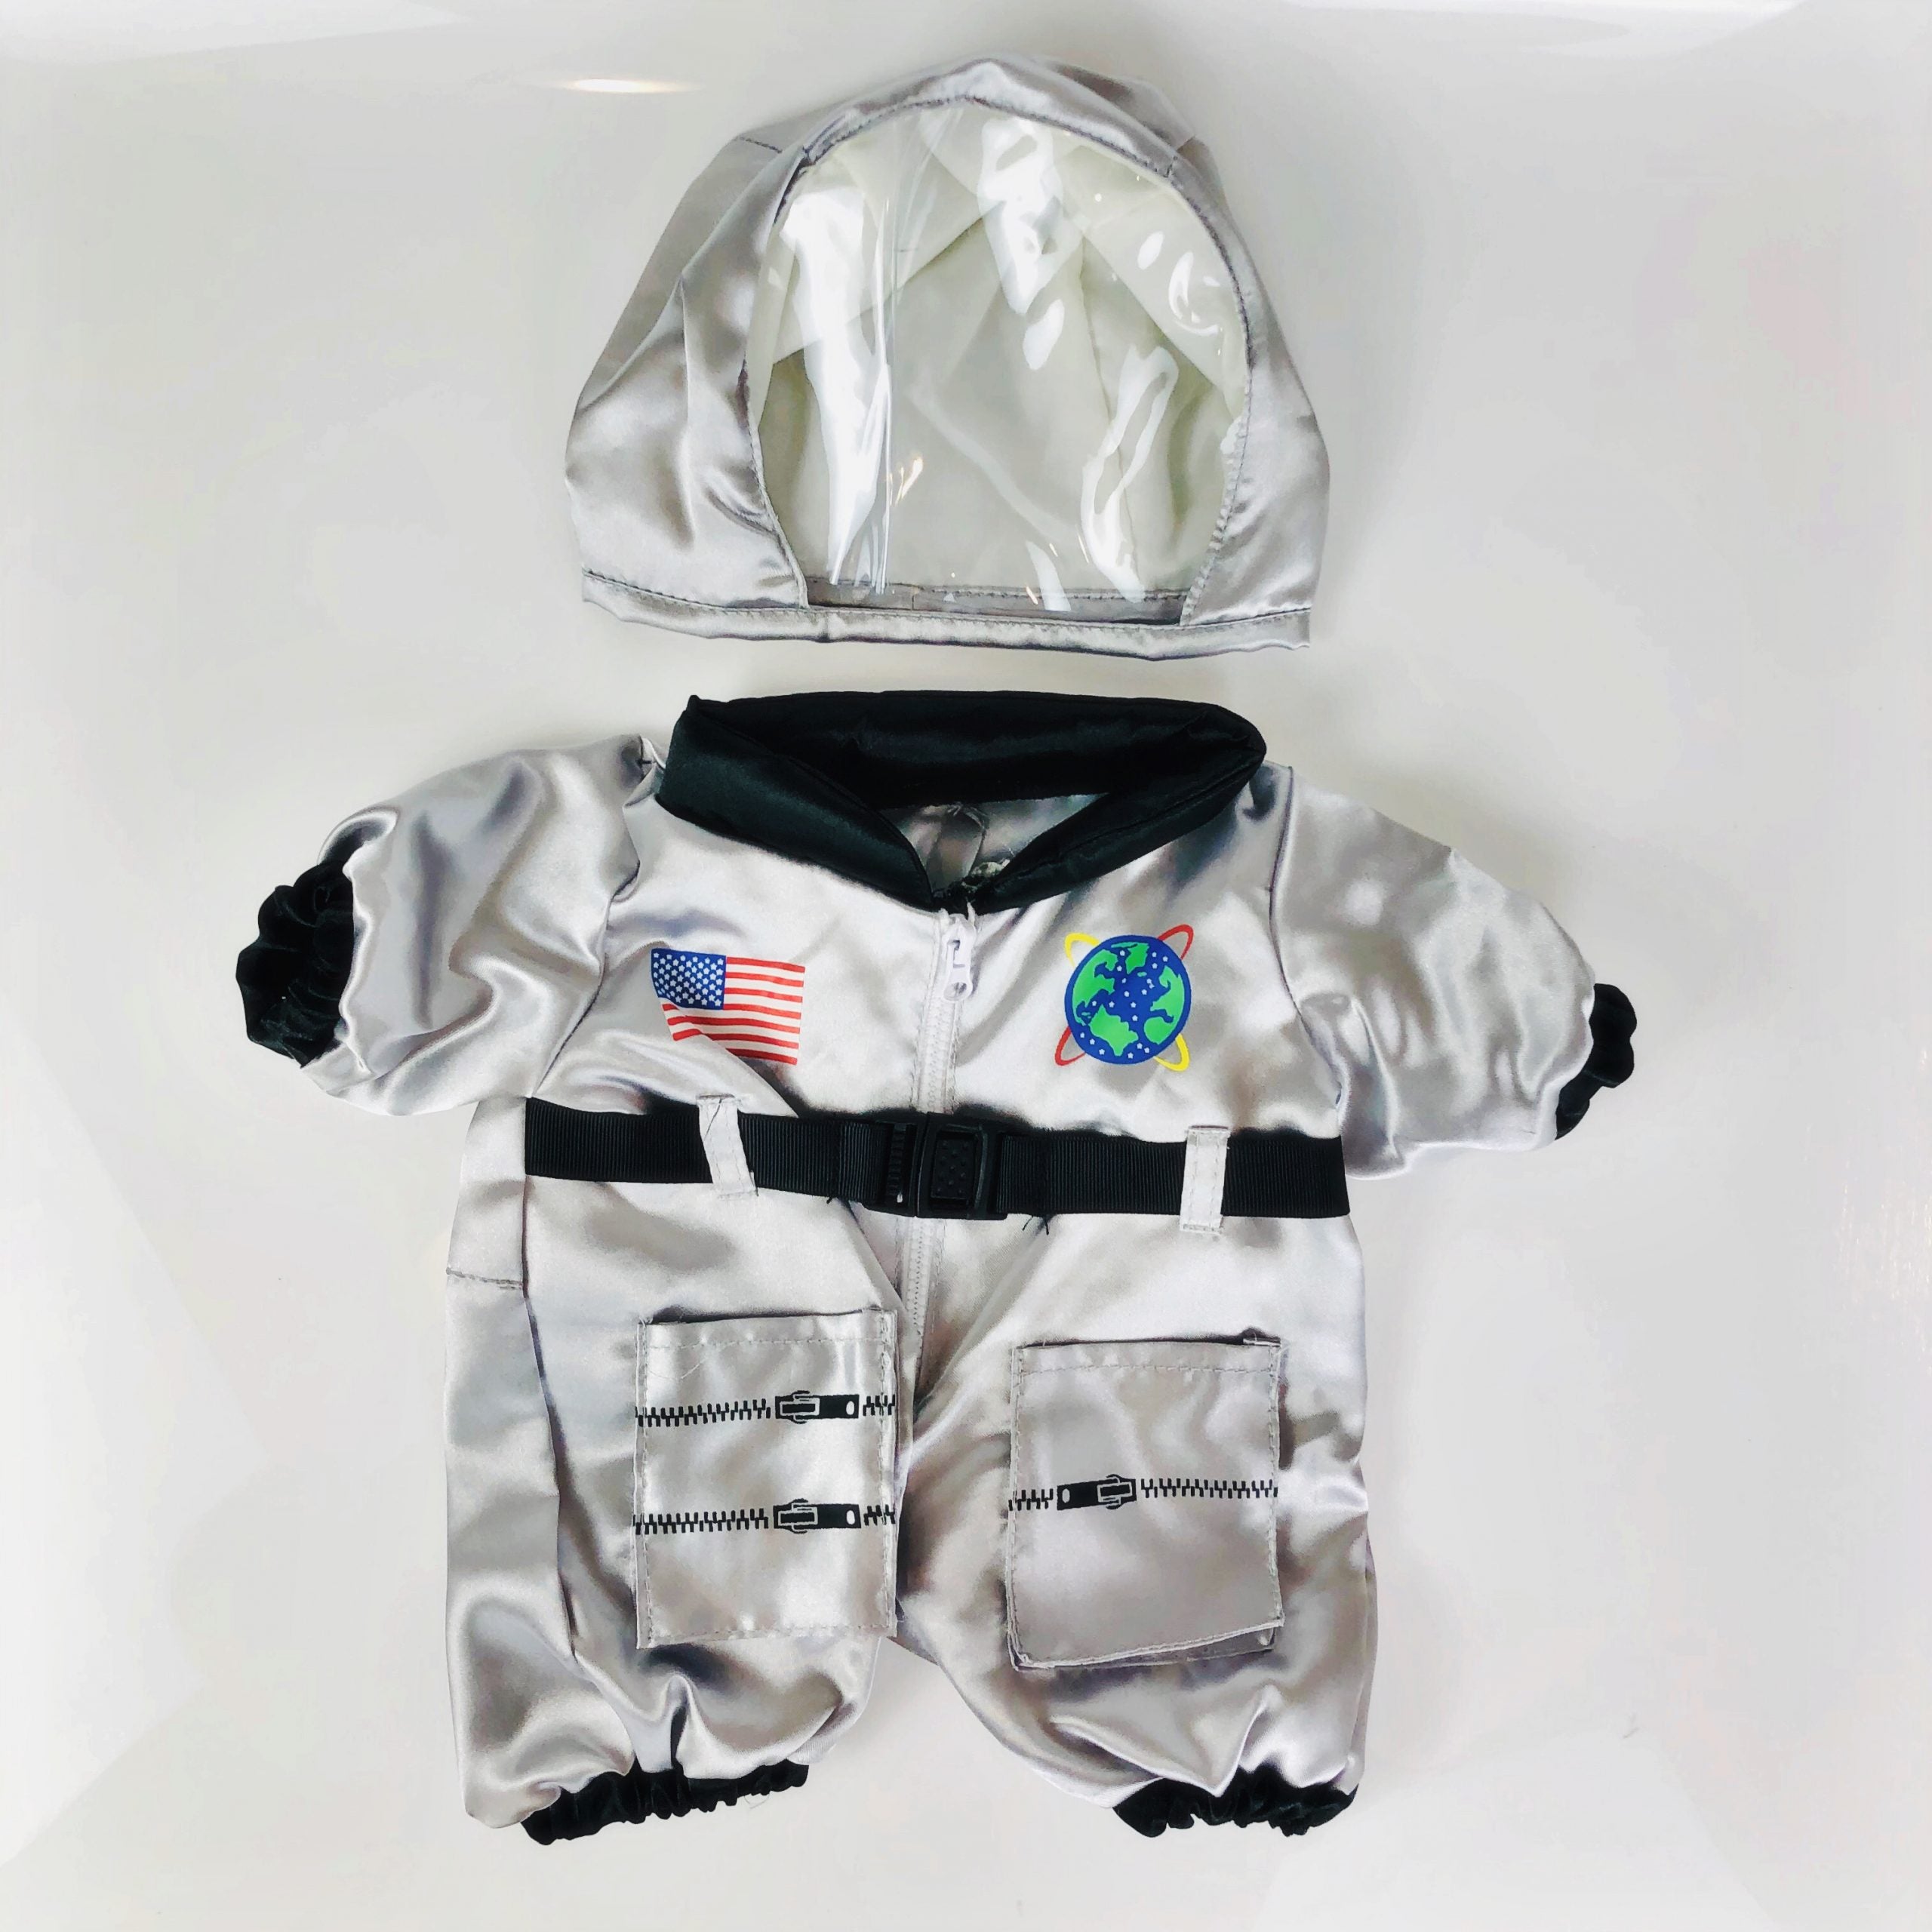 Astronaut outfit for 16" stuffed animals in the Frannie and Friends Create a Cuddly Collection. Fits most 16" plush upright animals